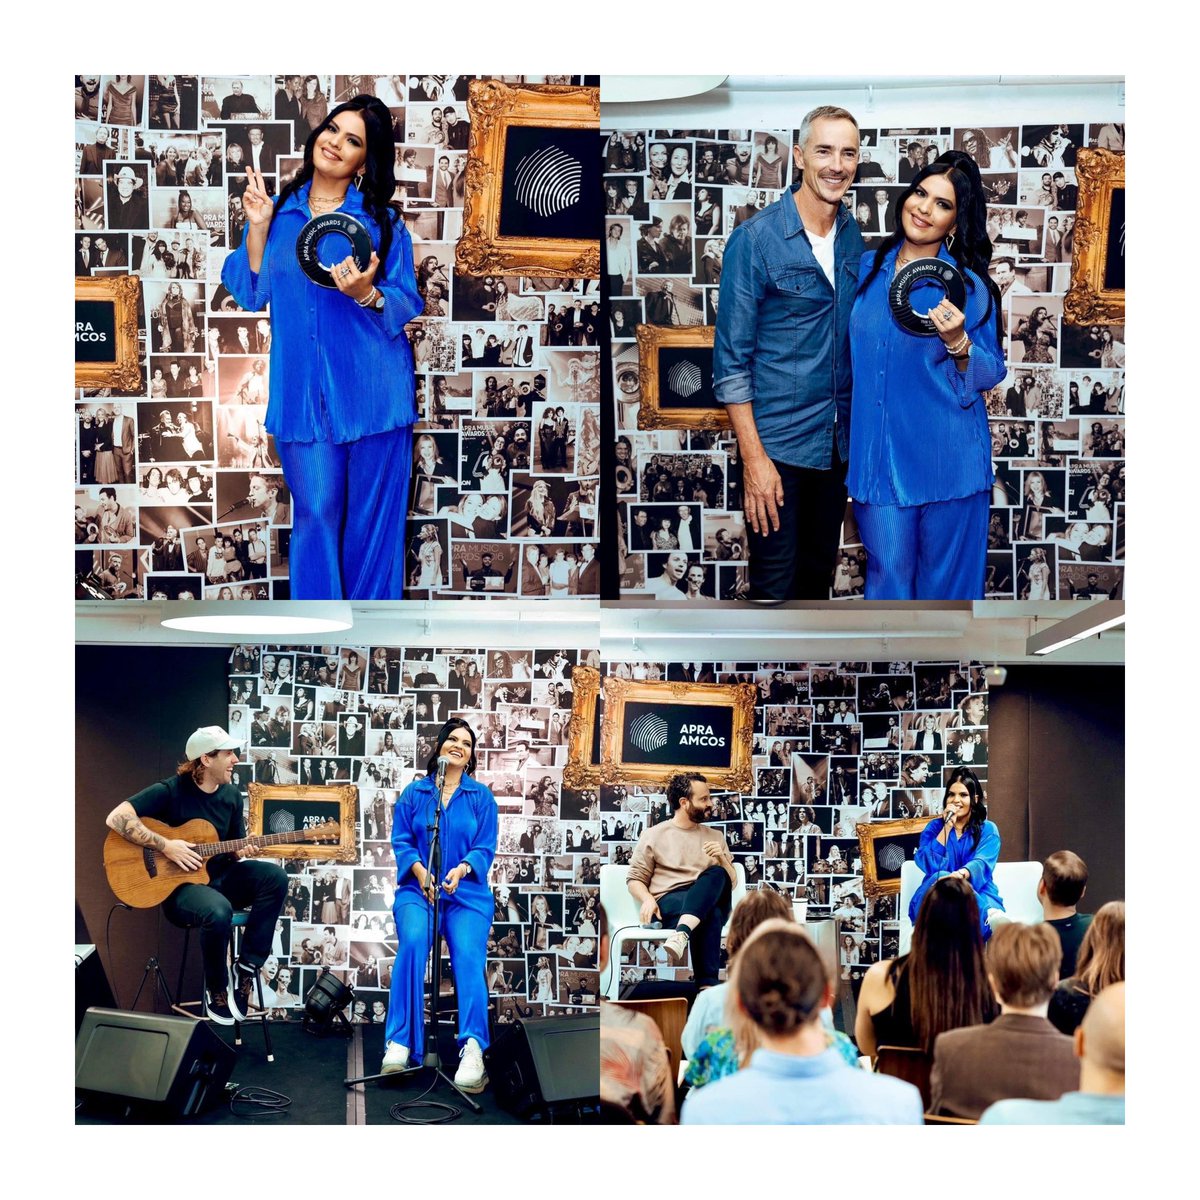 Congrats to the incredible Aussie / Global Dance icon @VASSY on her 2 Billion Award for her HIT single ‘Bad’ with @davidguetta & @SHOWTEK 💙🖤💙 VASSY was acknowledged for this amazing milestone in her home country by @APRAAMCOS in Sydney!